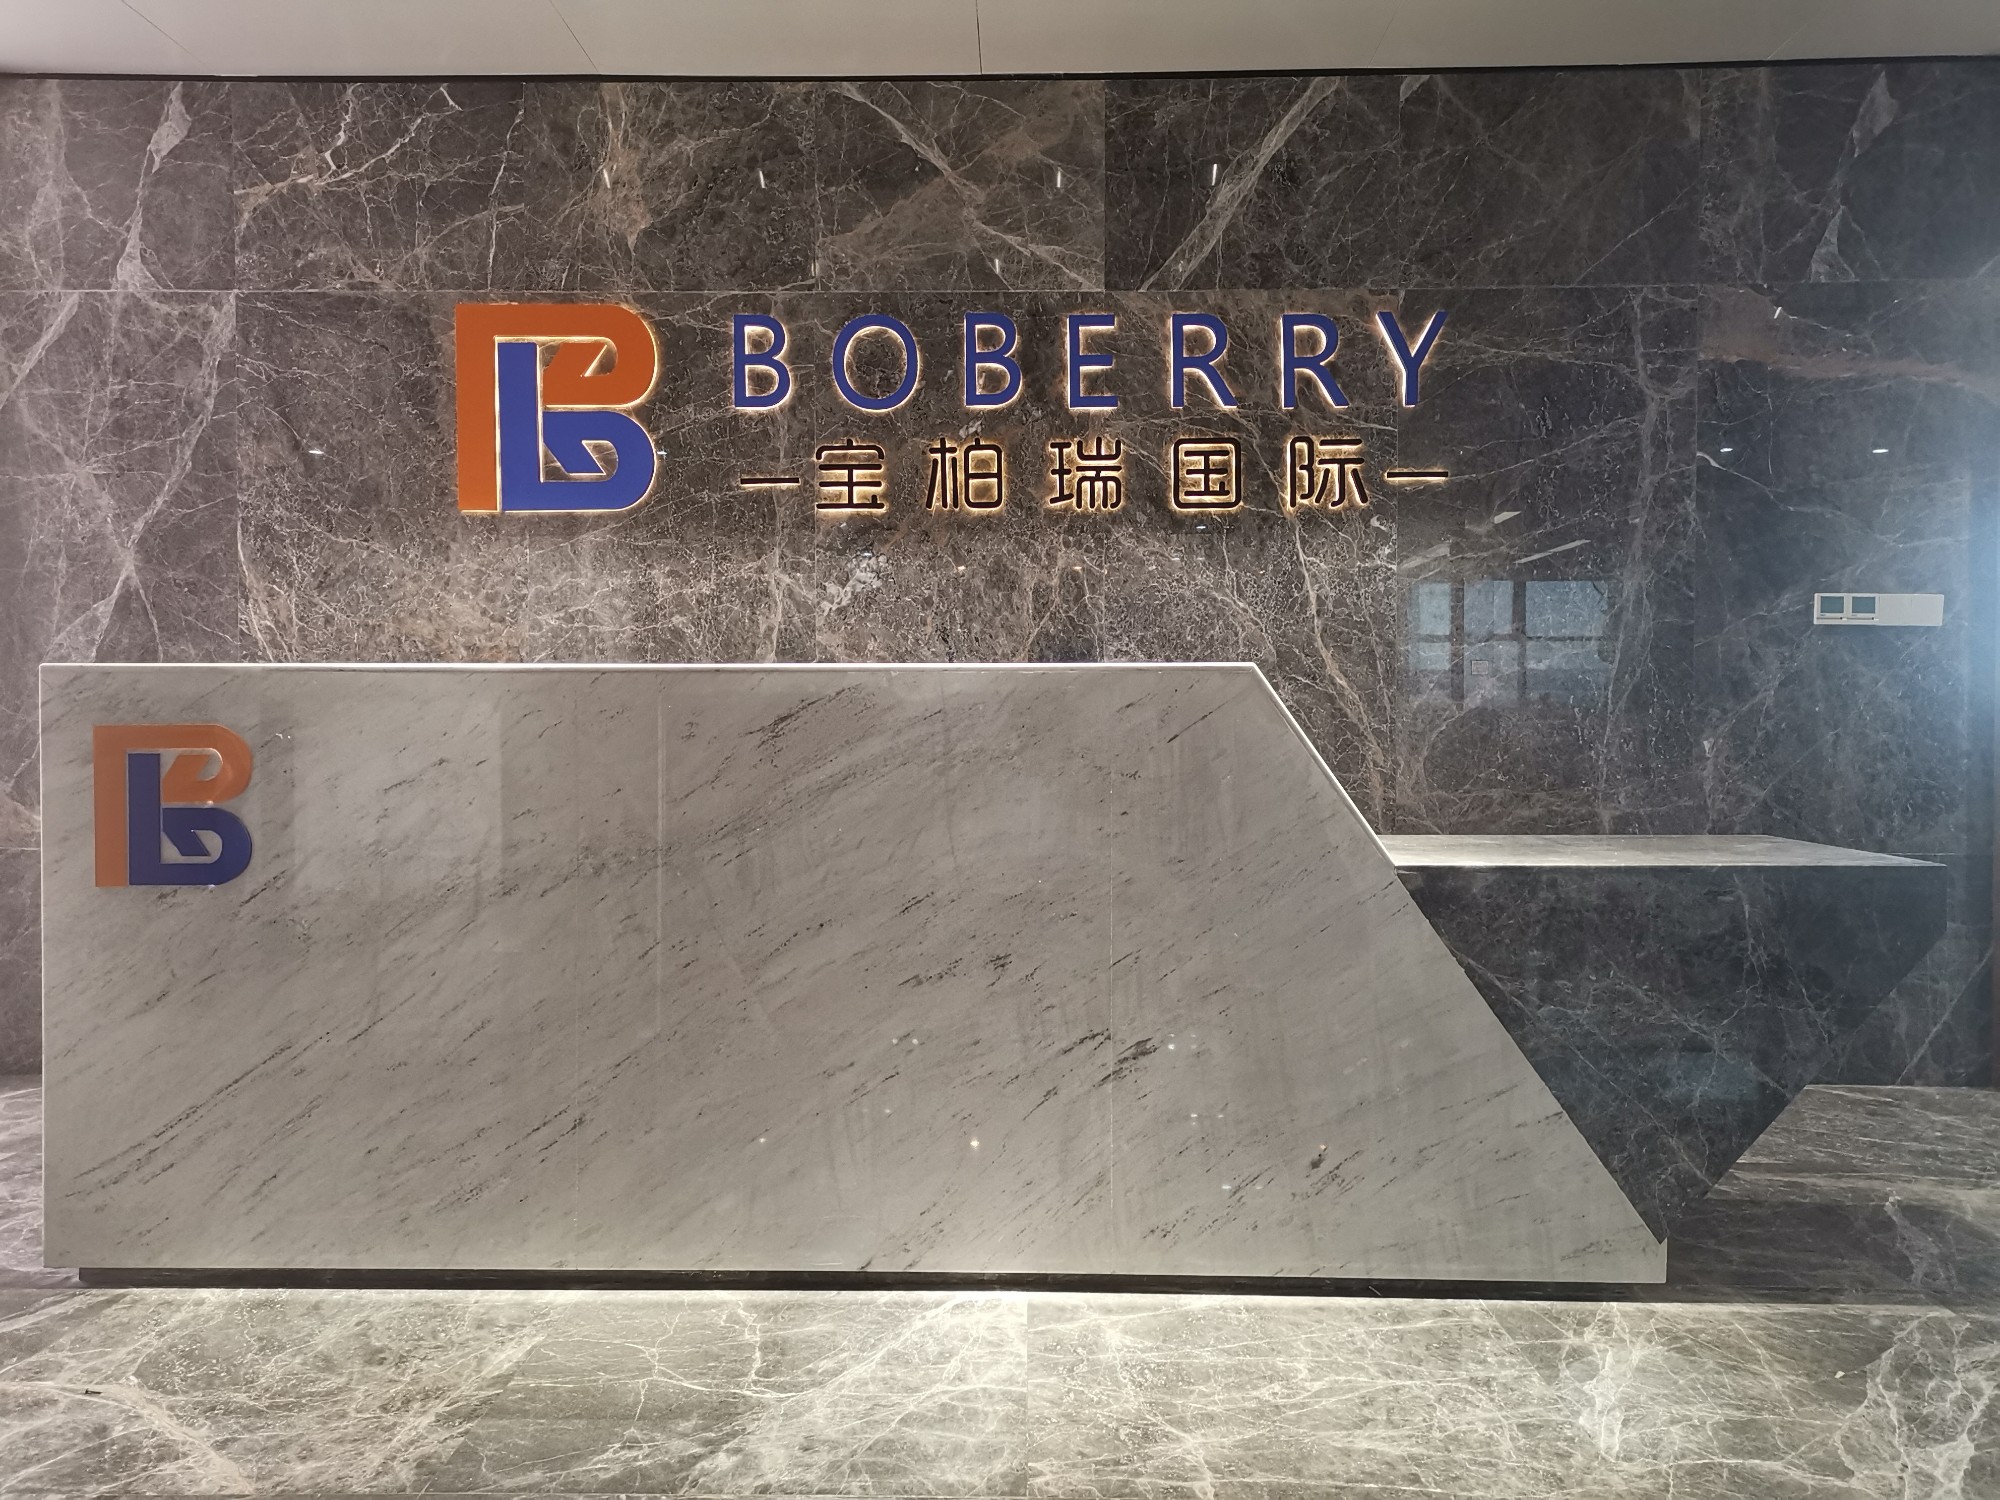 Boberry Group Information